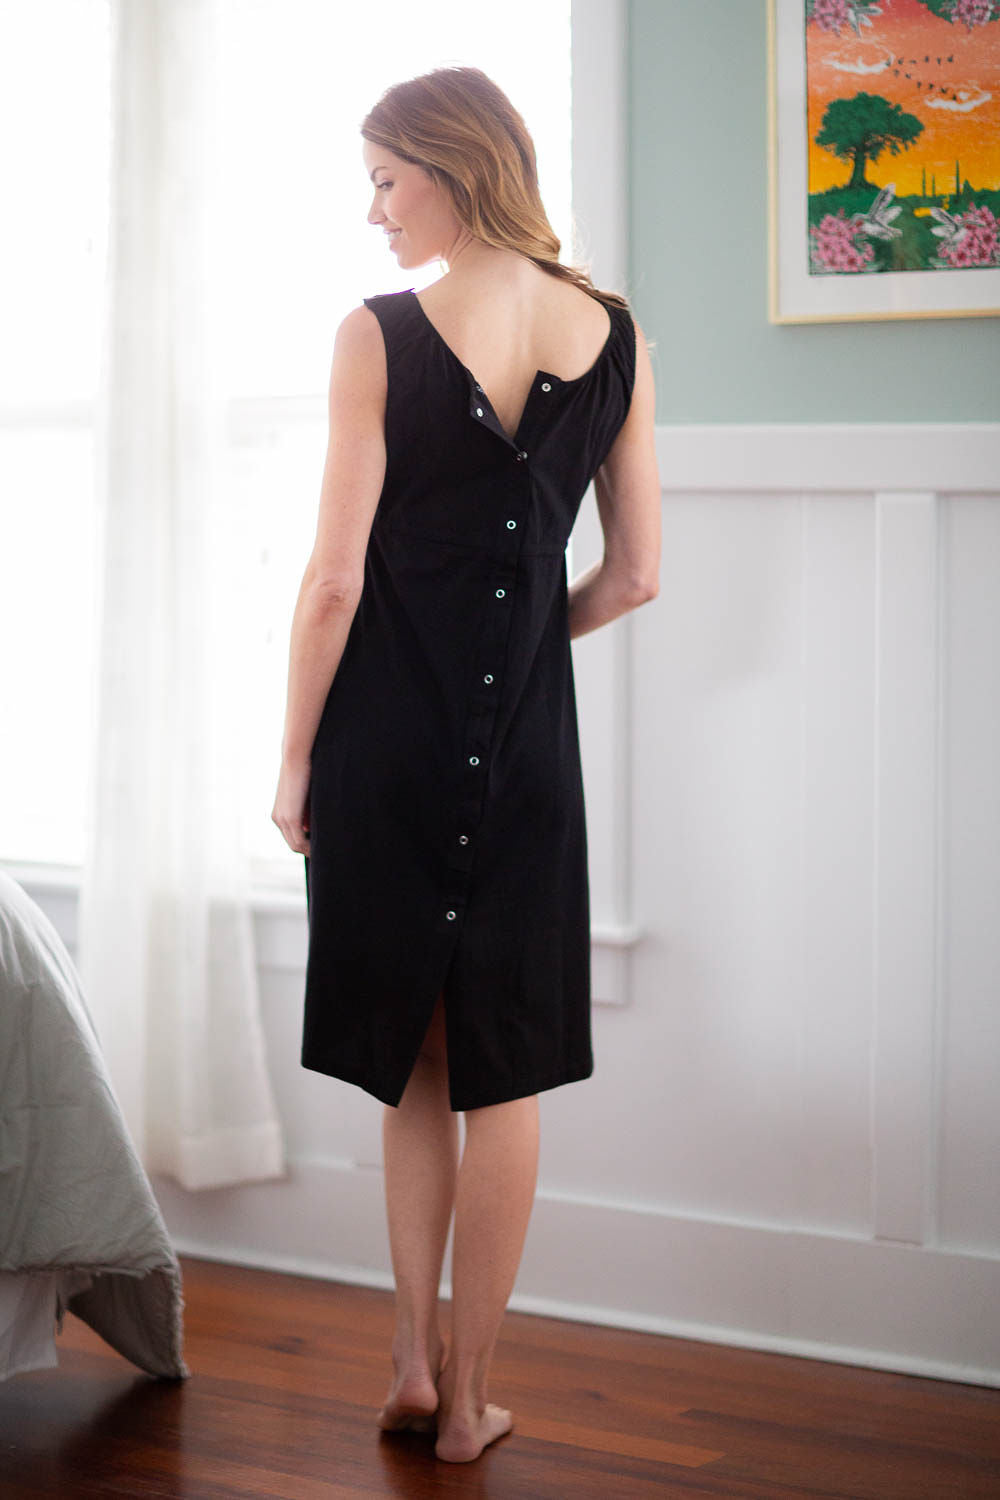 Simply Black 3 in 1 Labor Gown